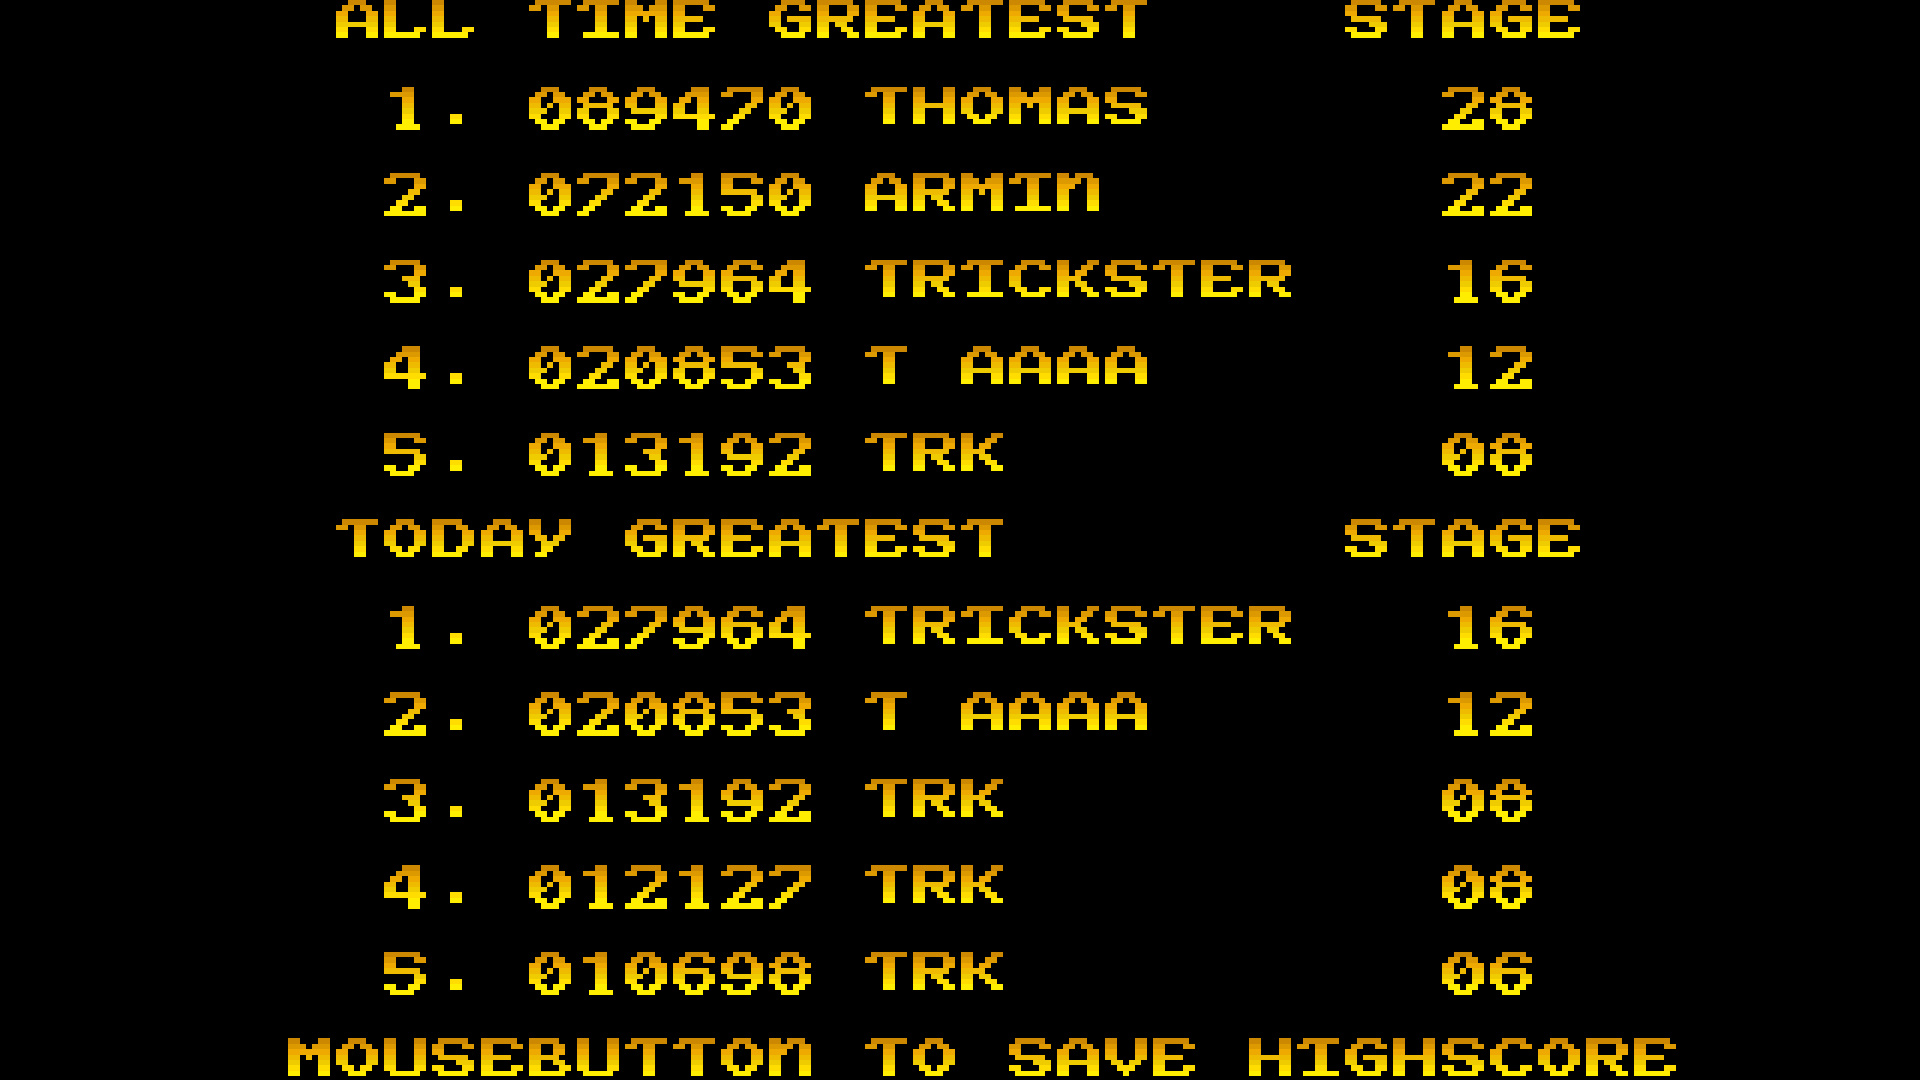 TheTrickster: Great Giana Sisters (Amiga Emulated) 27,964 points on 2015-07-29 07:33:14